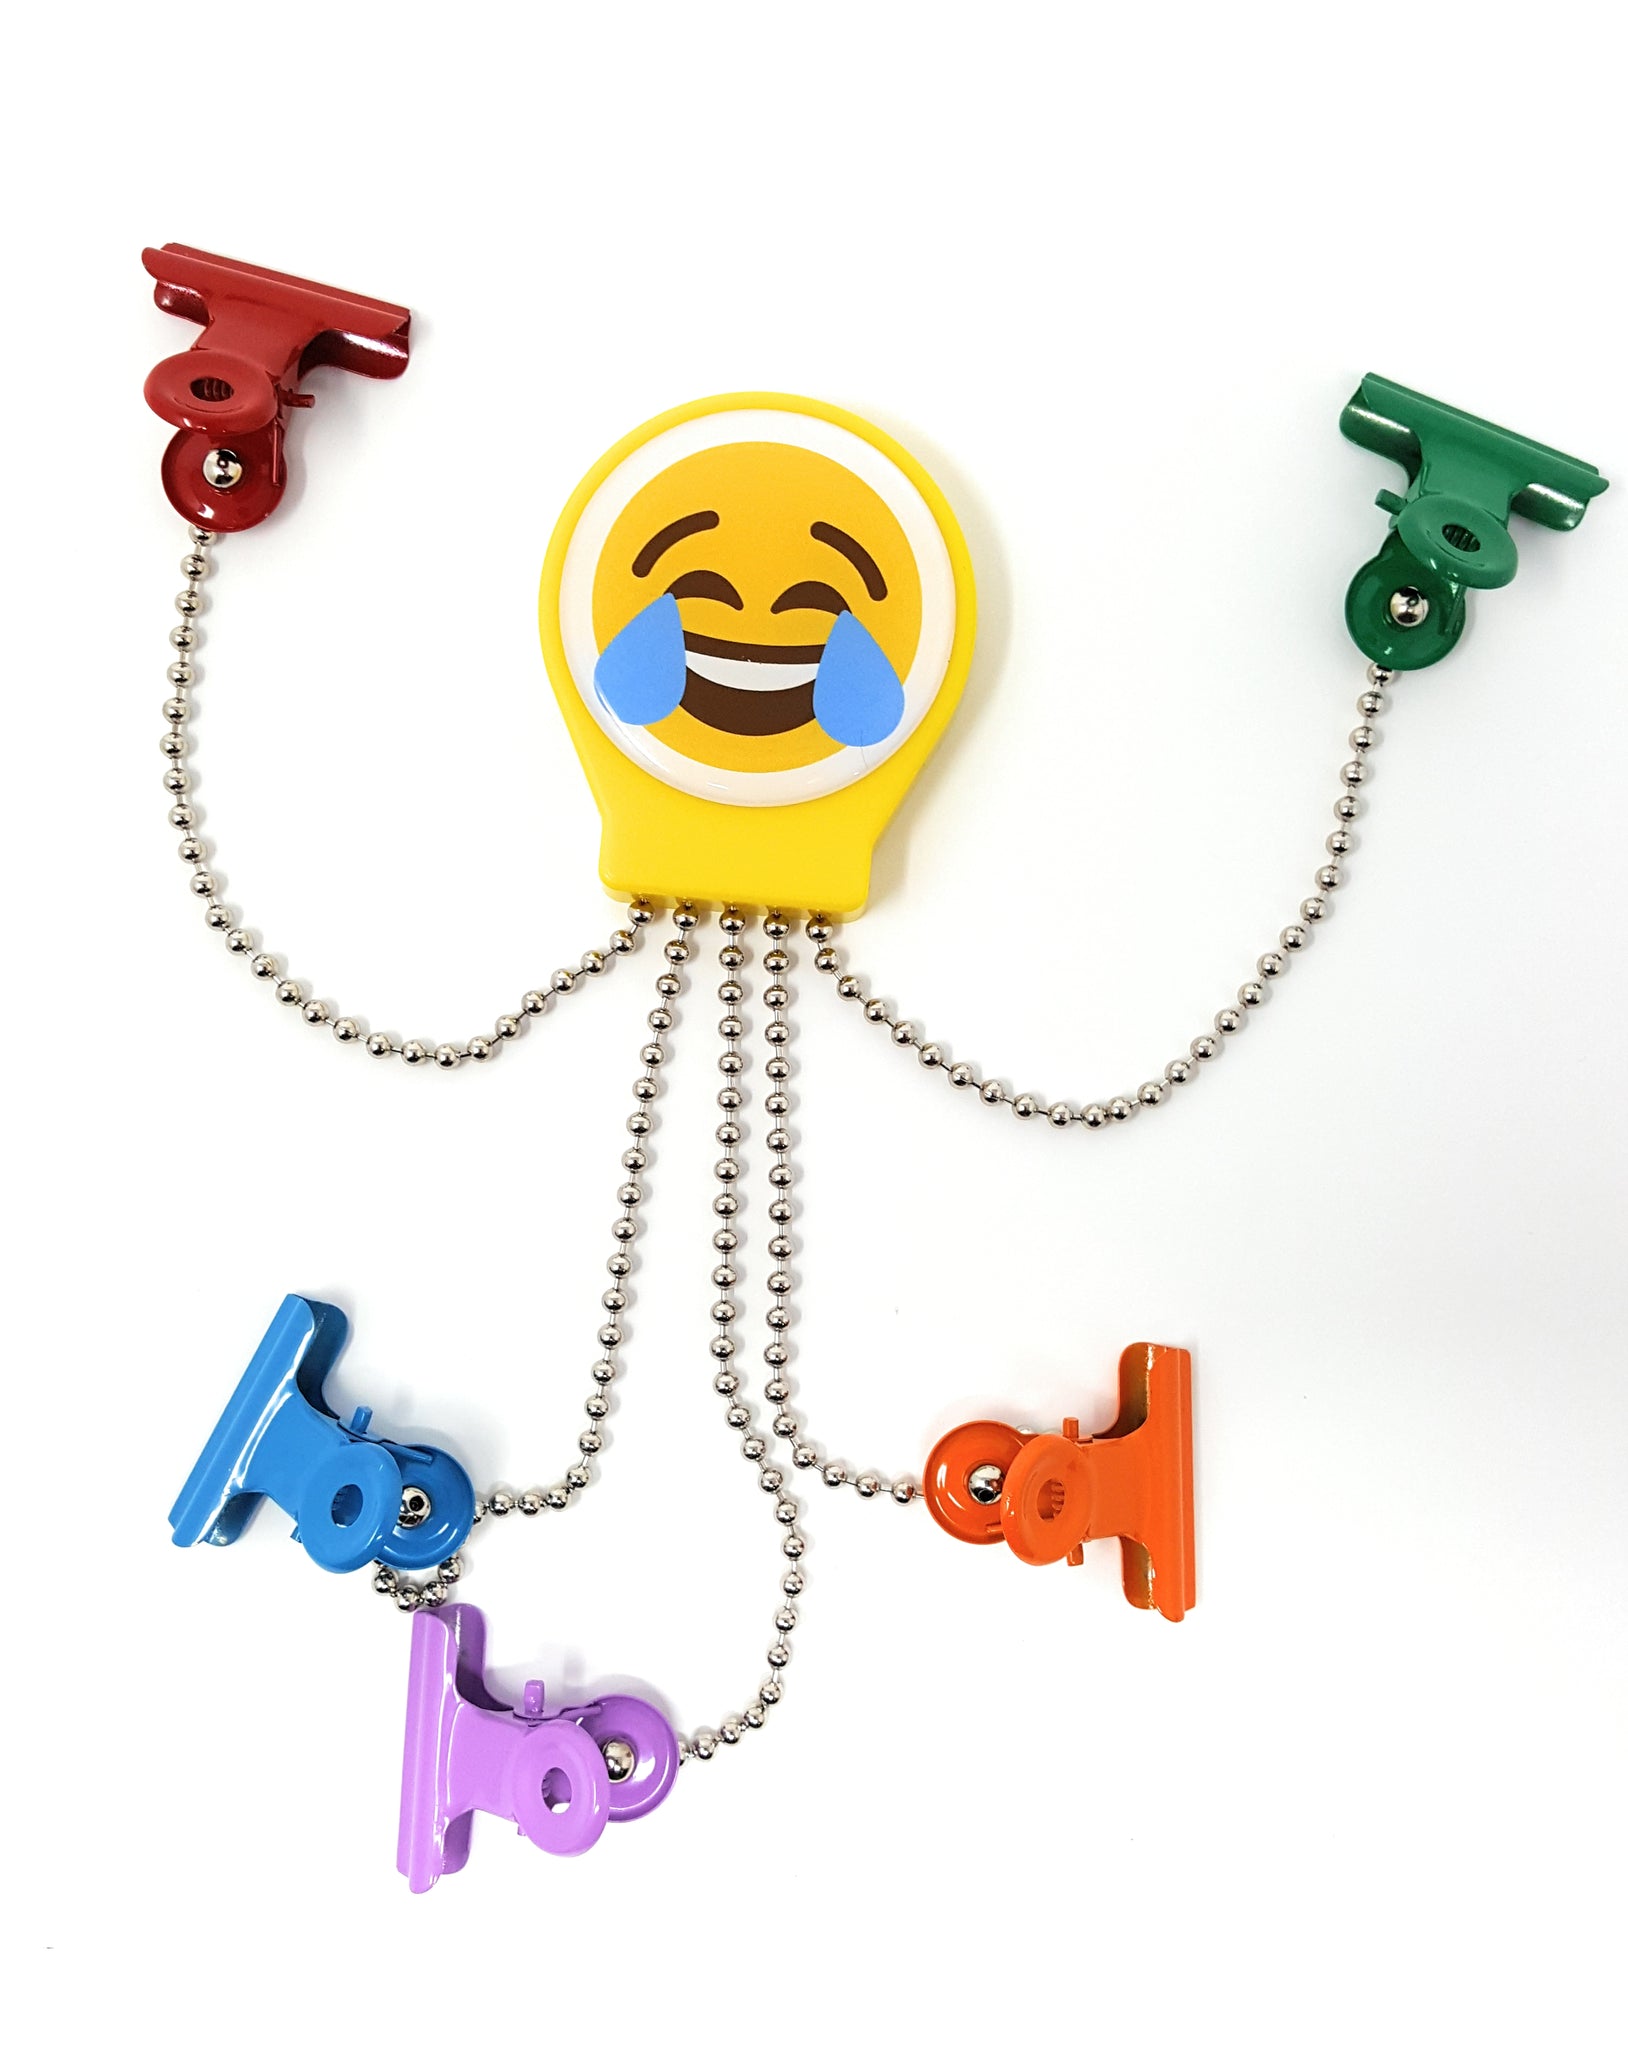 OctoClip Refrigerator Magnet – LOL Tears Emoji with Multi Colored Clips